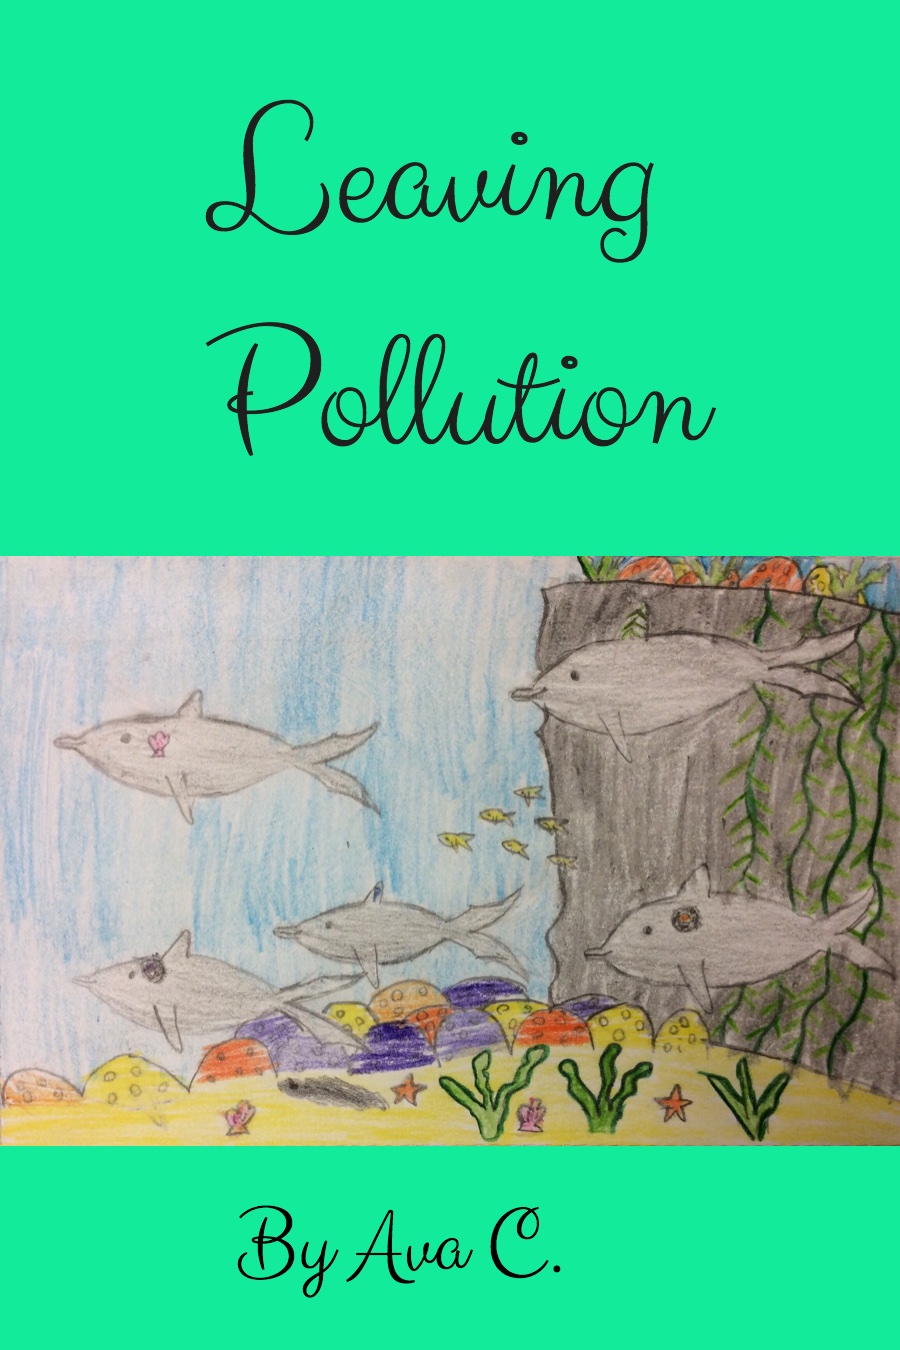 Leaving Pollution by Ava C